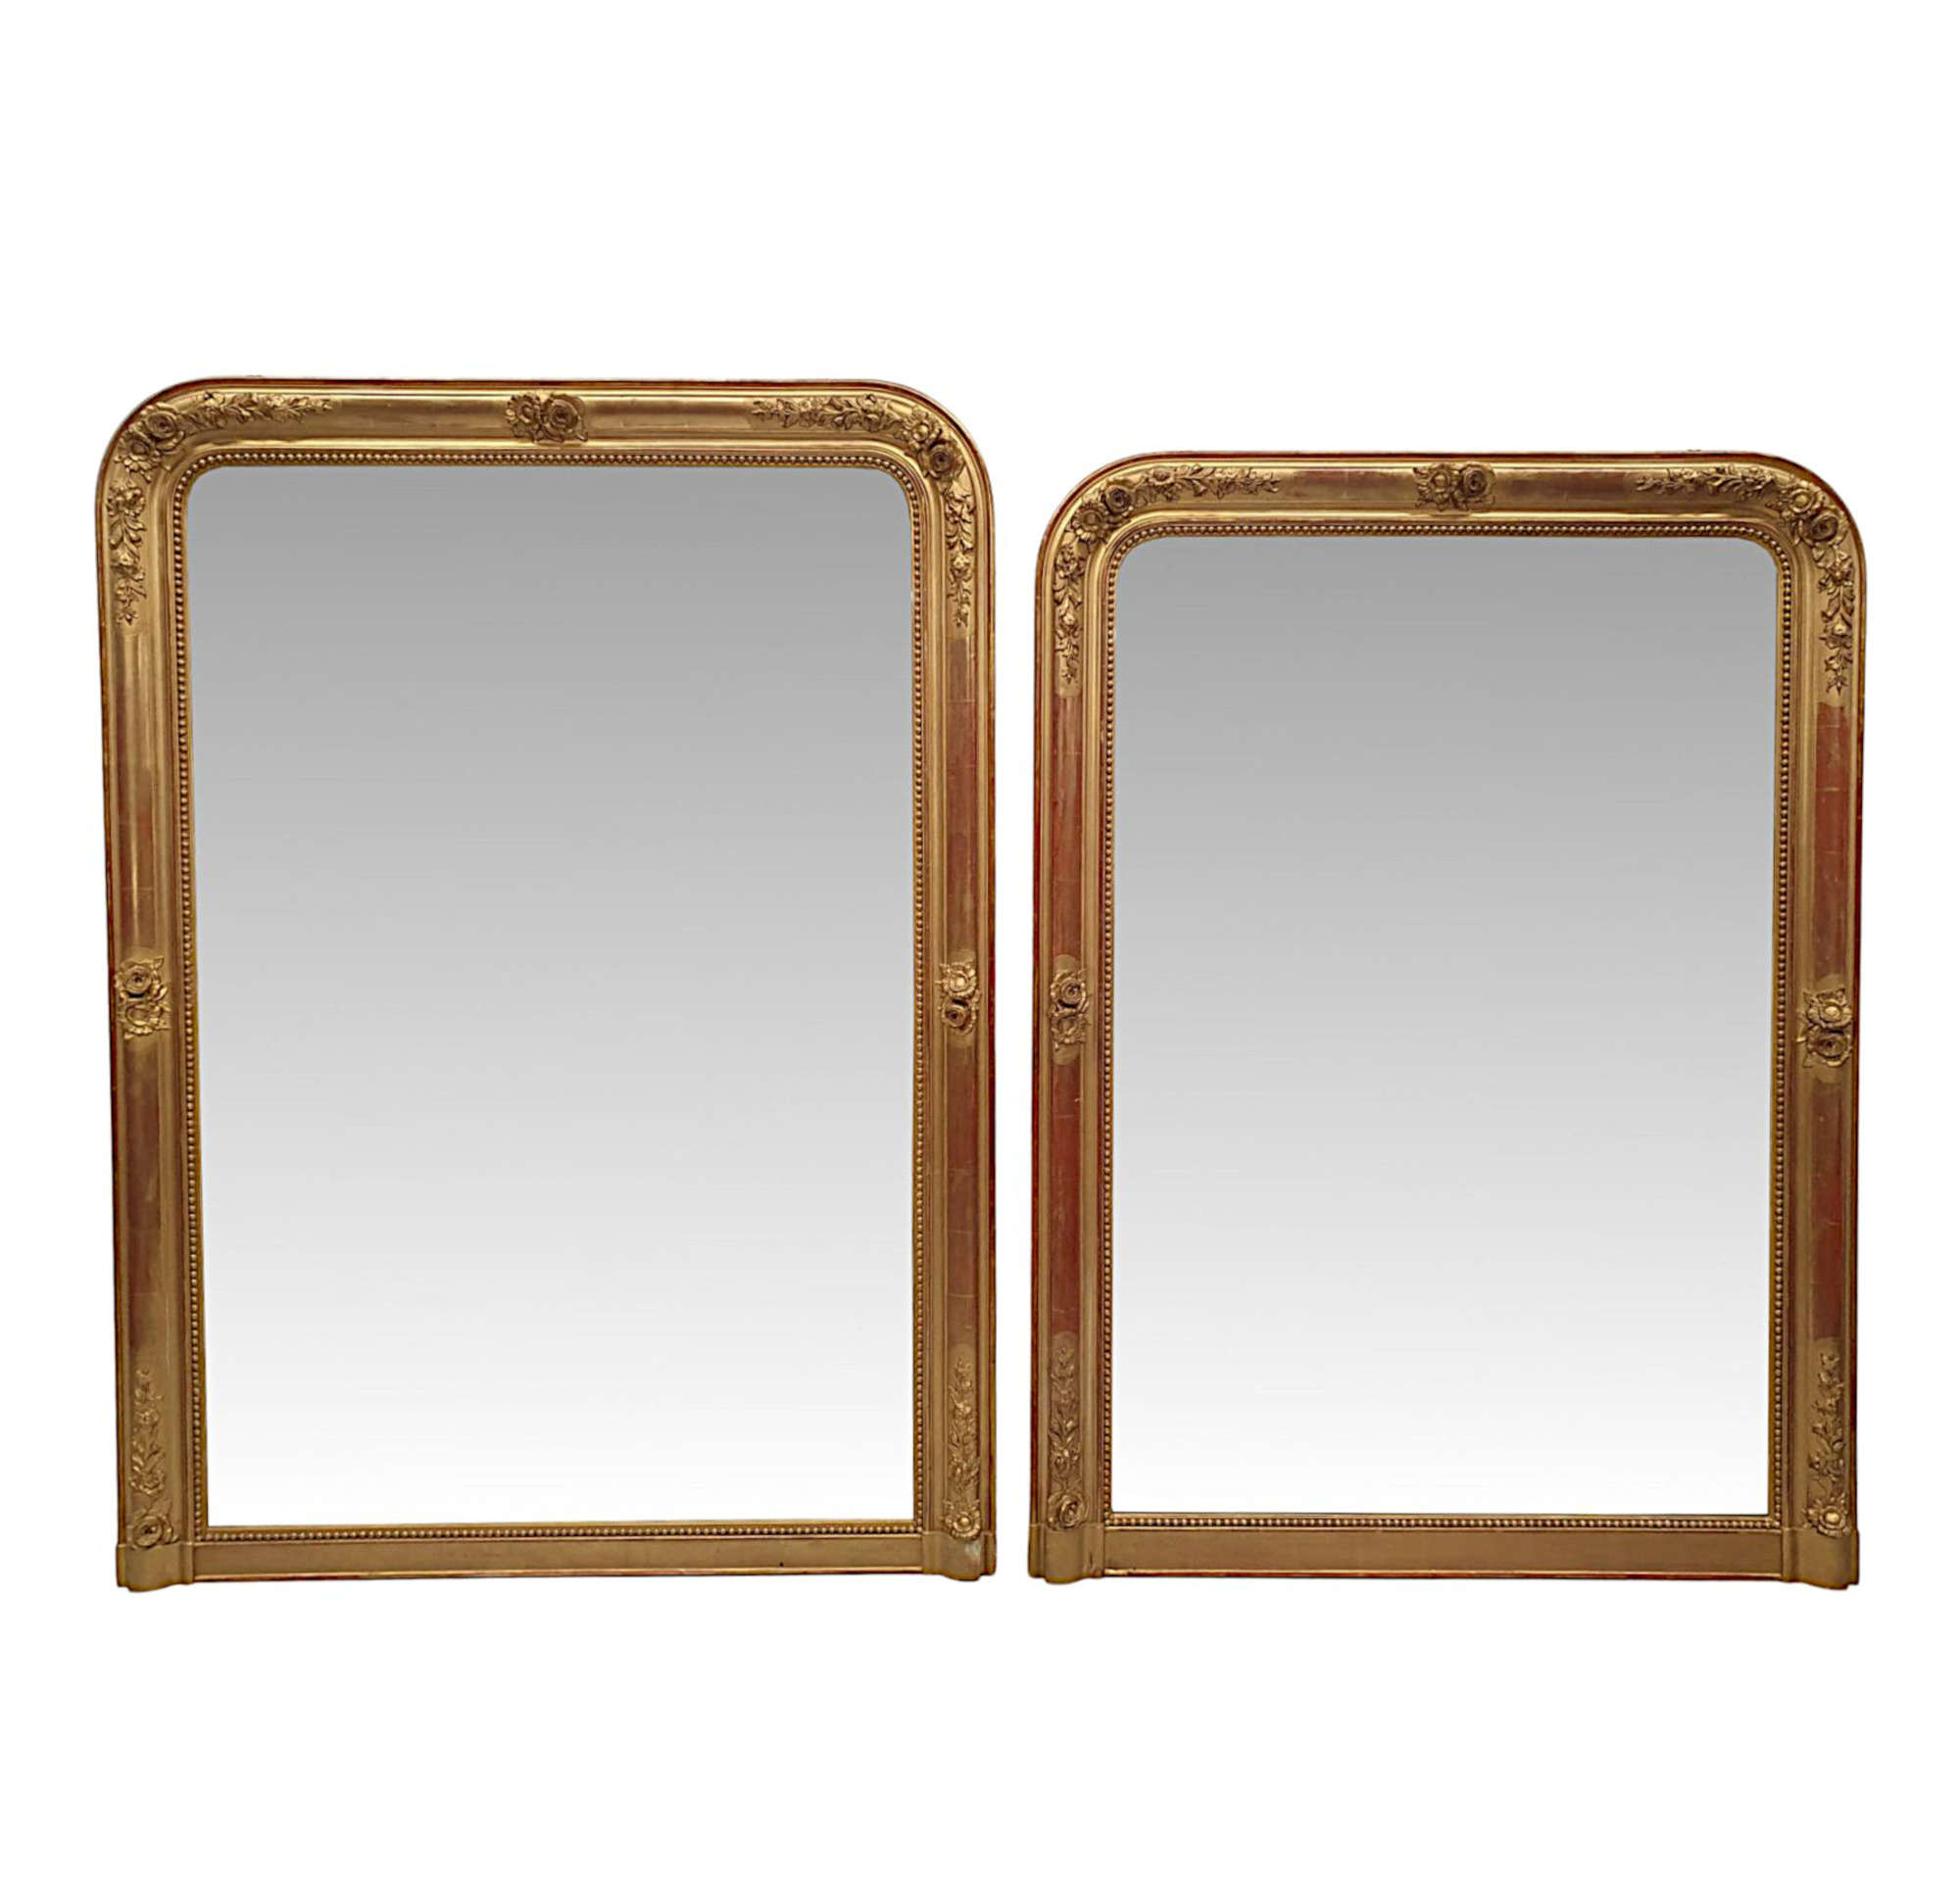 A Fabulous Near Pair Of 19th Century Giltwood Antique Overmantle Mirrors